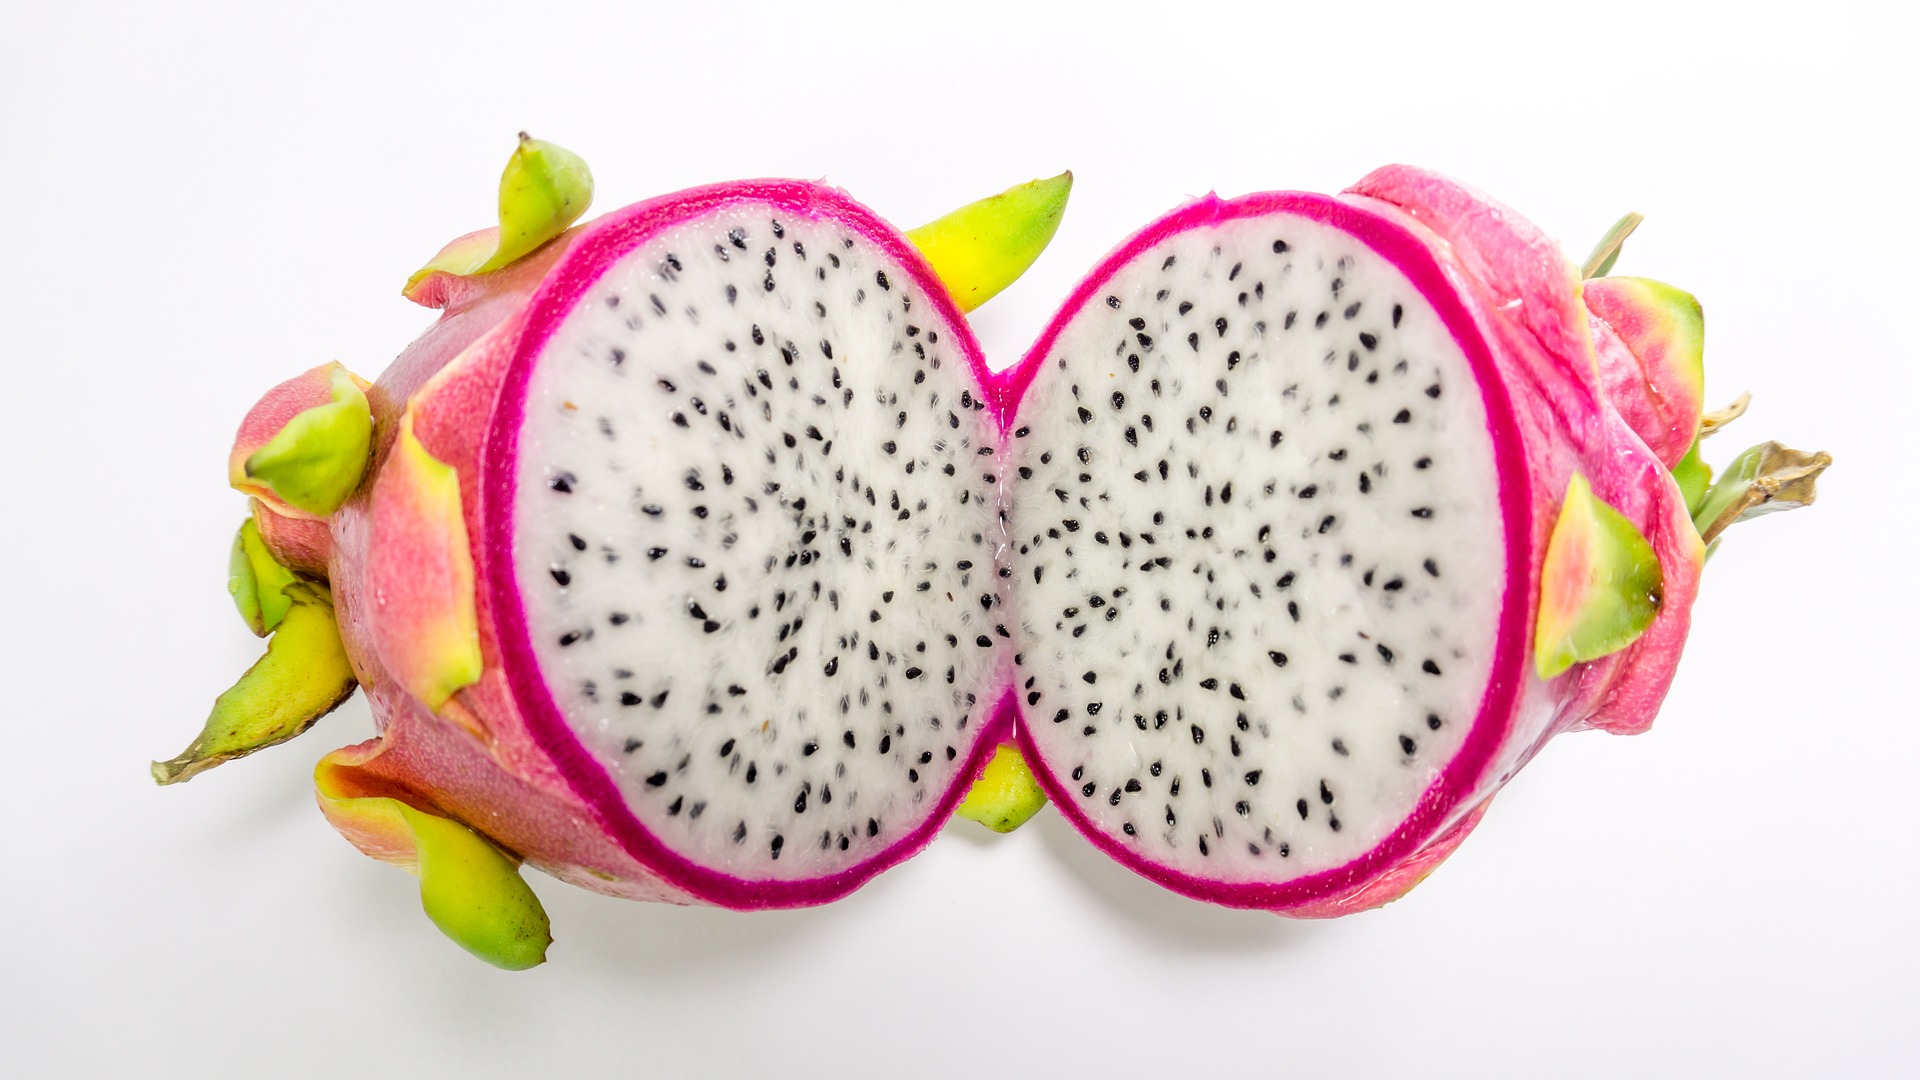 How Dragon Fruit Is Grown - The Produce Nerd